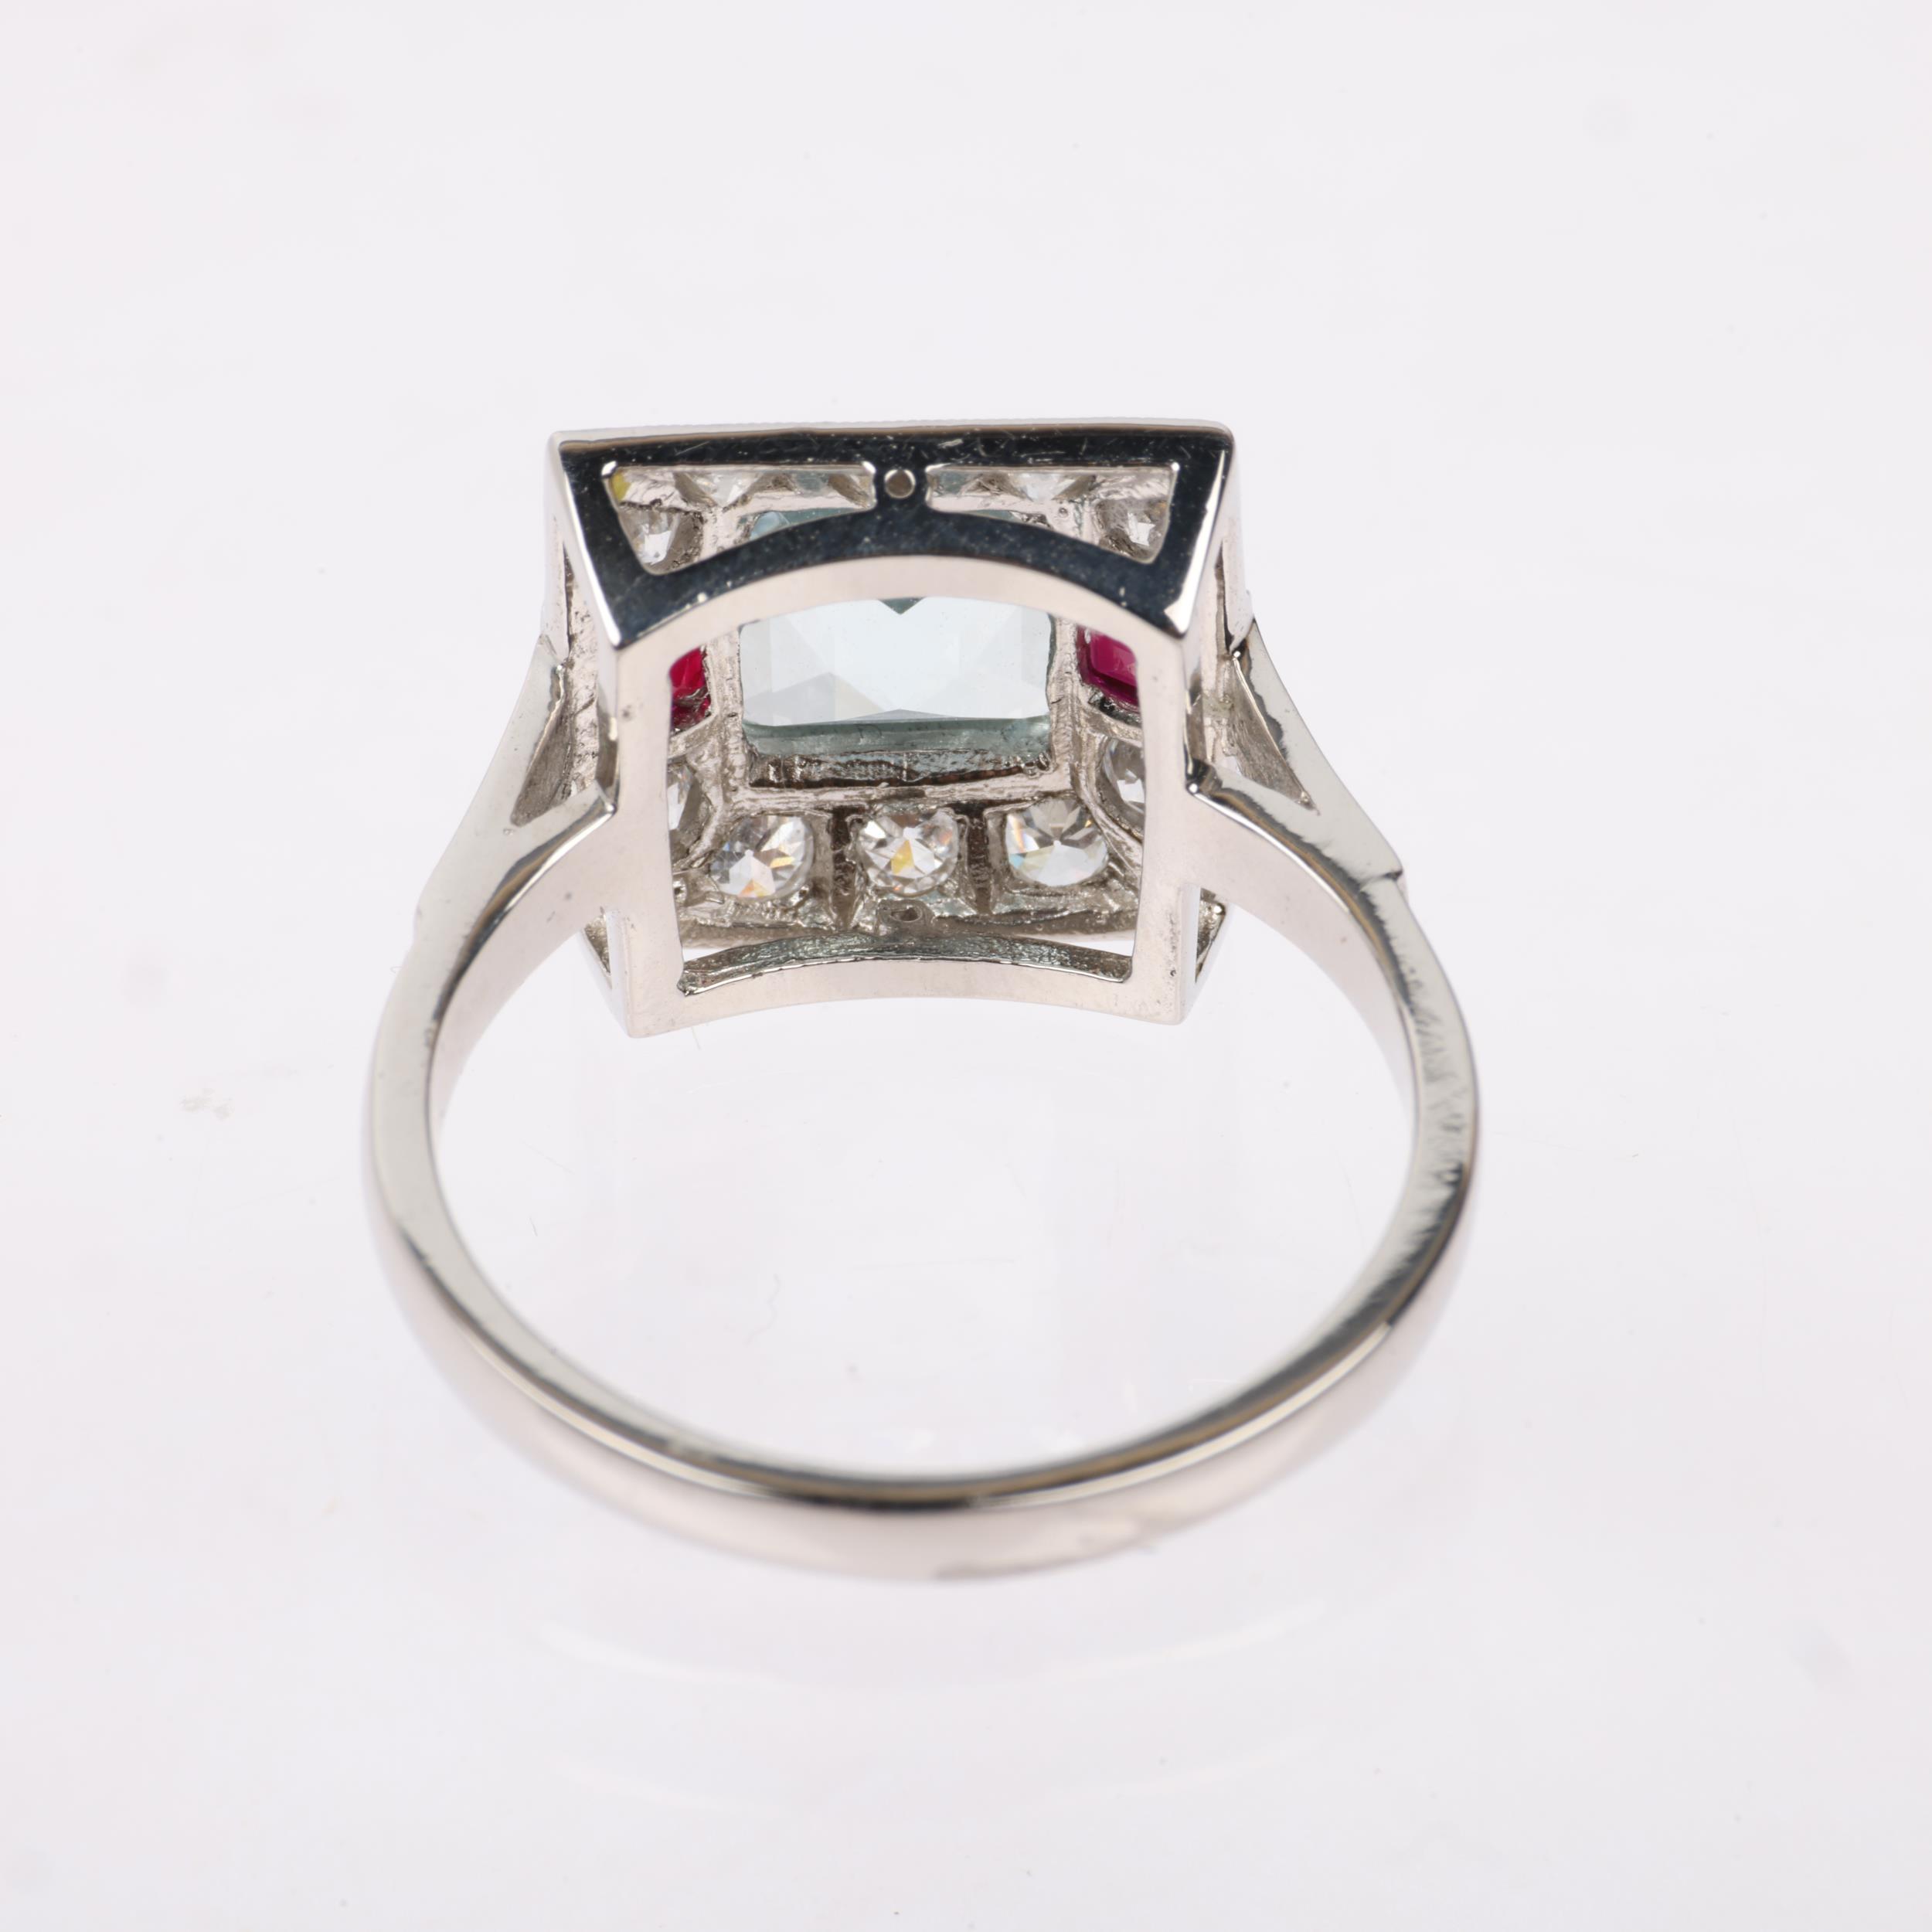 An Art Deco style platinum aquamarine ruby and diamond square panel ring, set with square-cut rubies - Image 3 of 4